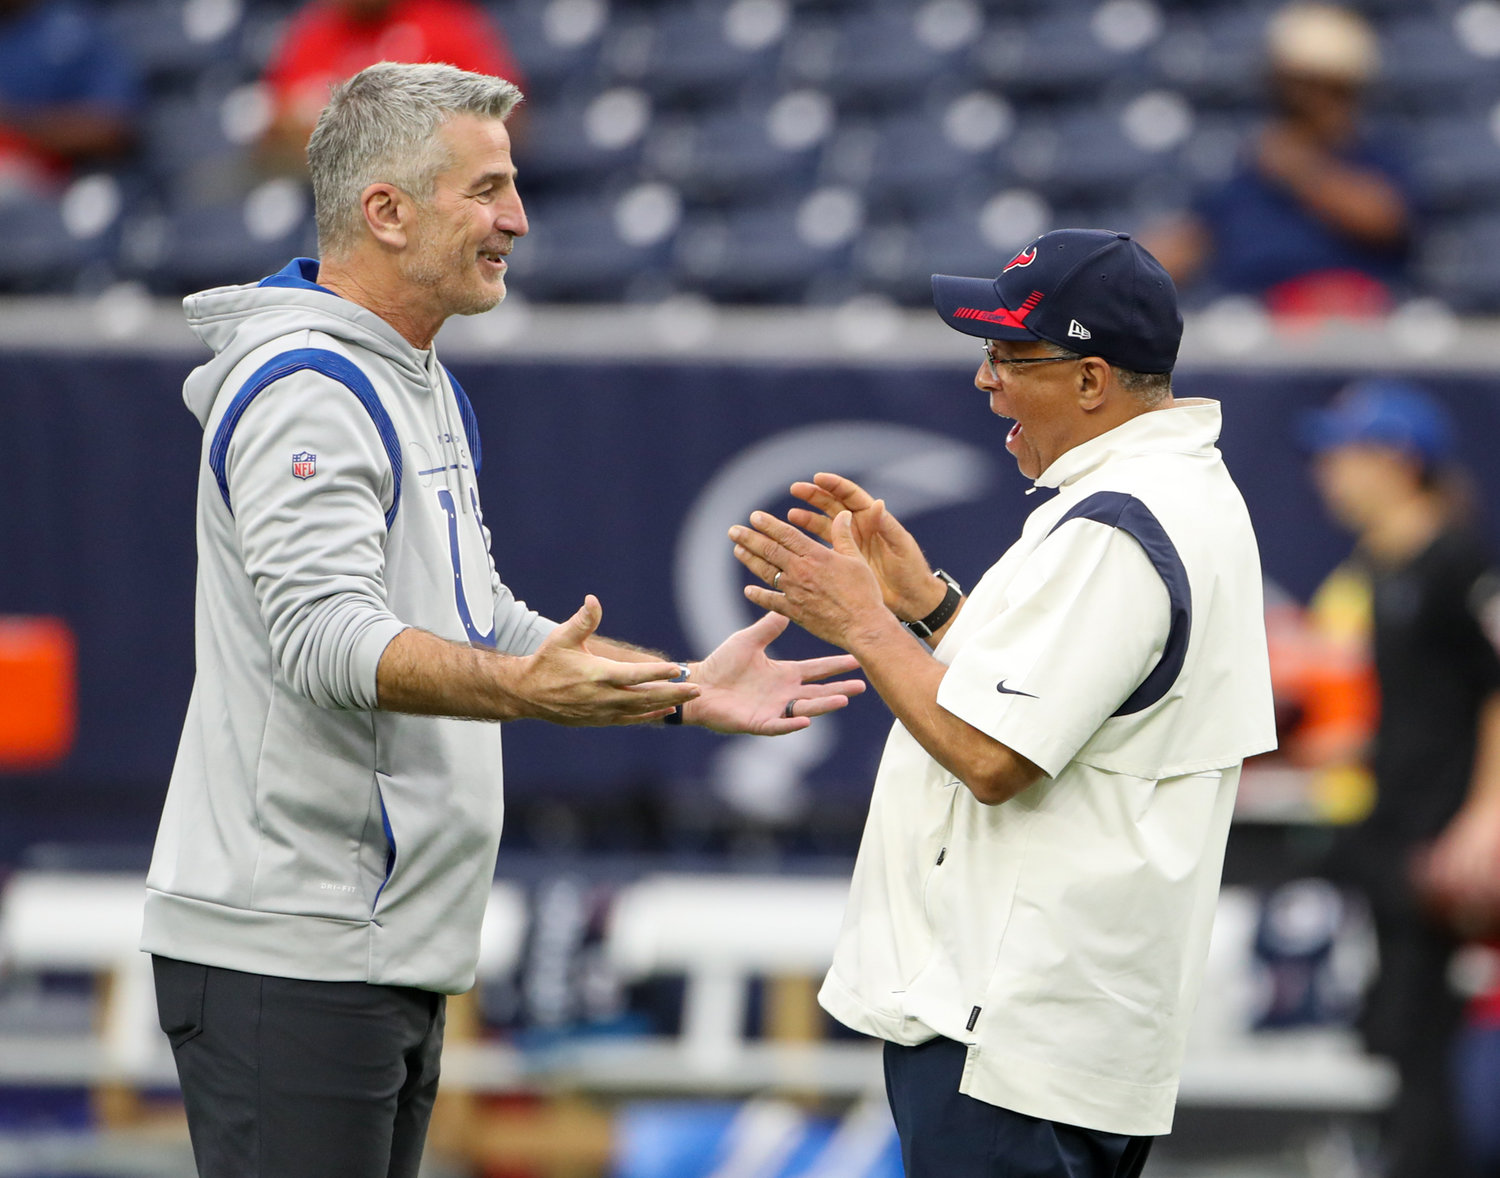 Indianapolis Colts head coach Frank Reich (left) talks with Houston Texans head coach David Culley before the start of an NFL game between the Texans and the Colts on December 5, 2021 in Houston, Texas.